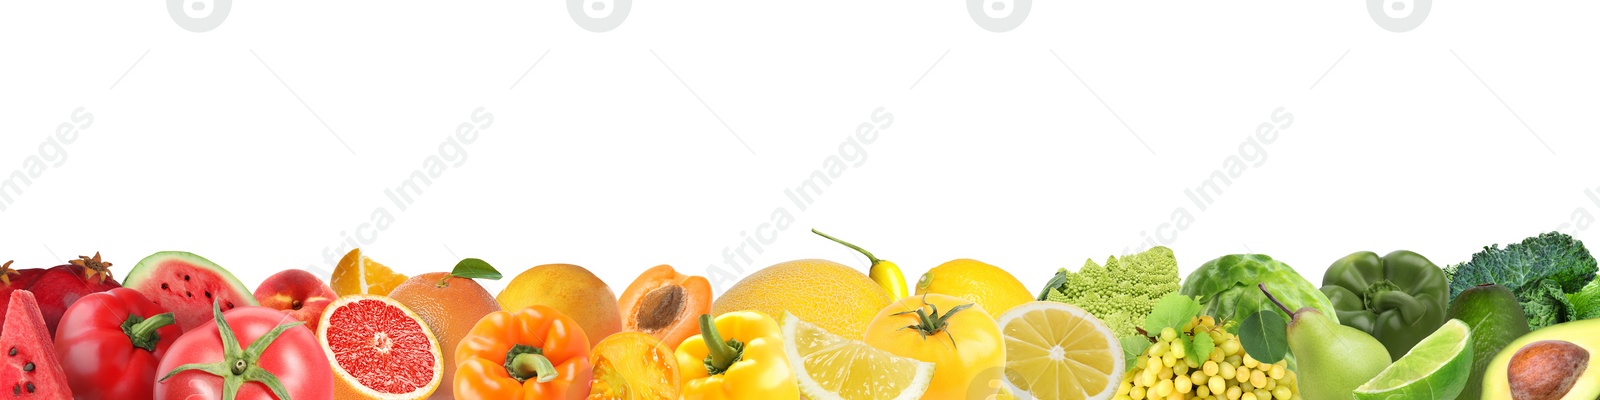 Image of Many fresh fruits and vegetables on white background, banner design